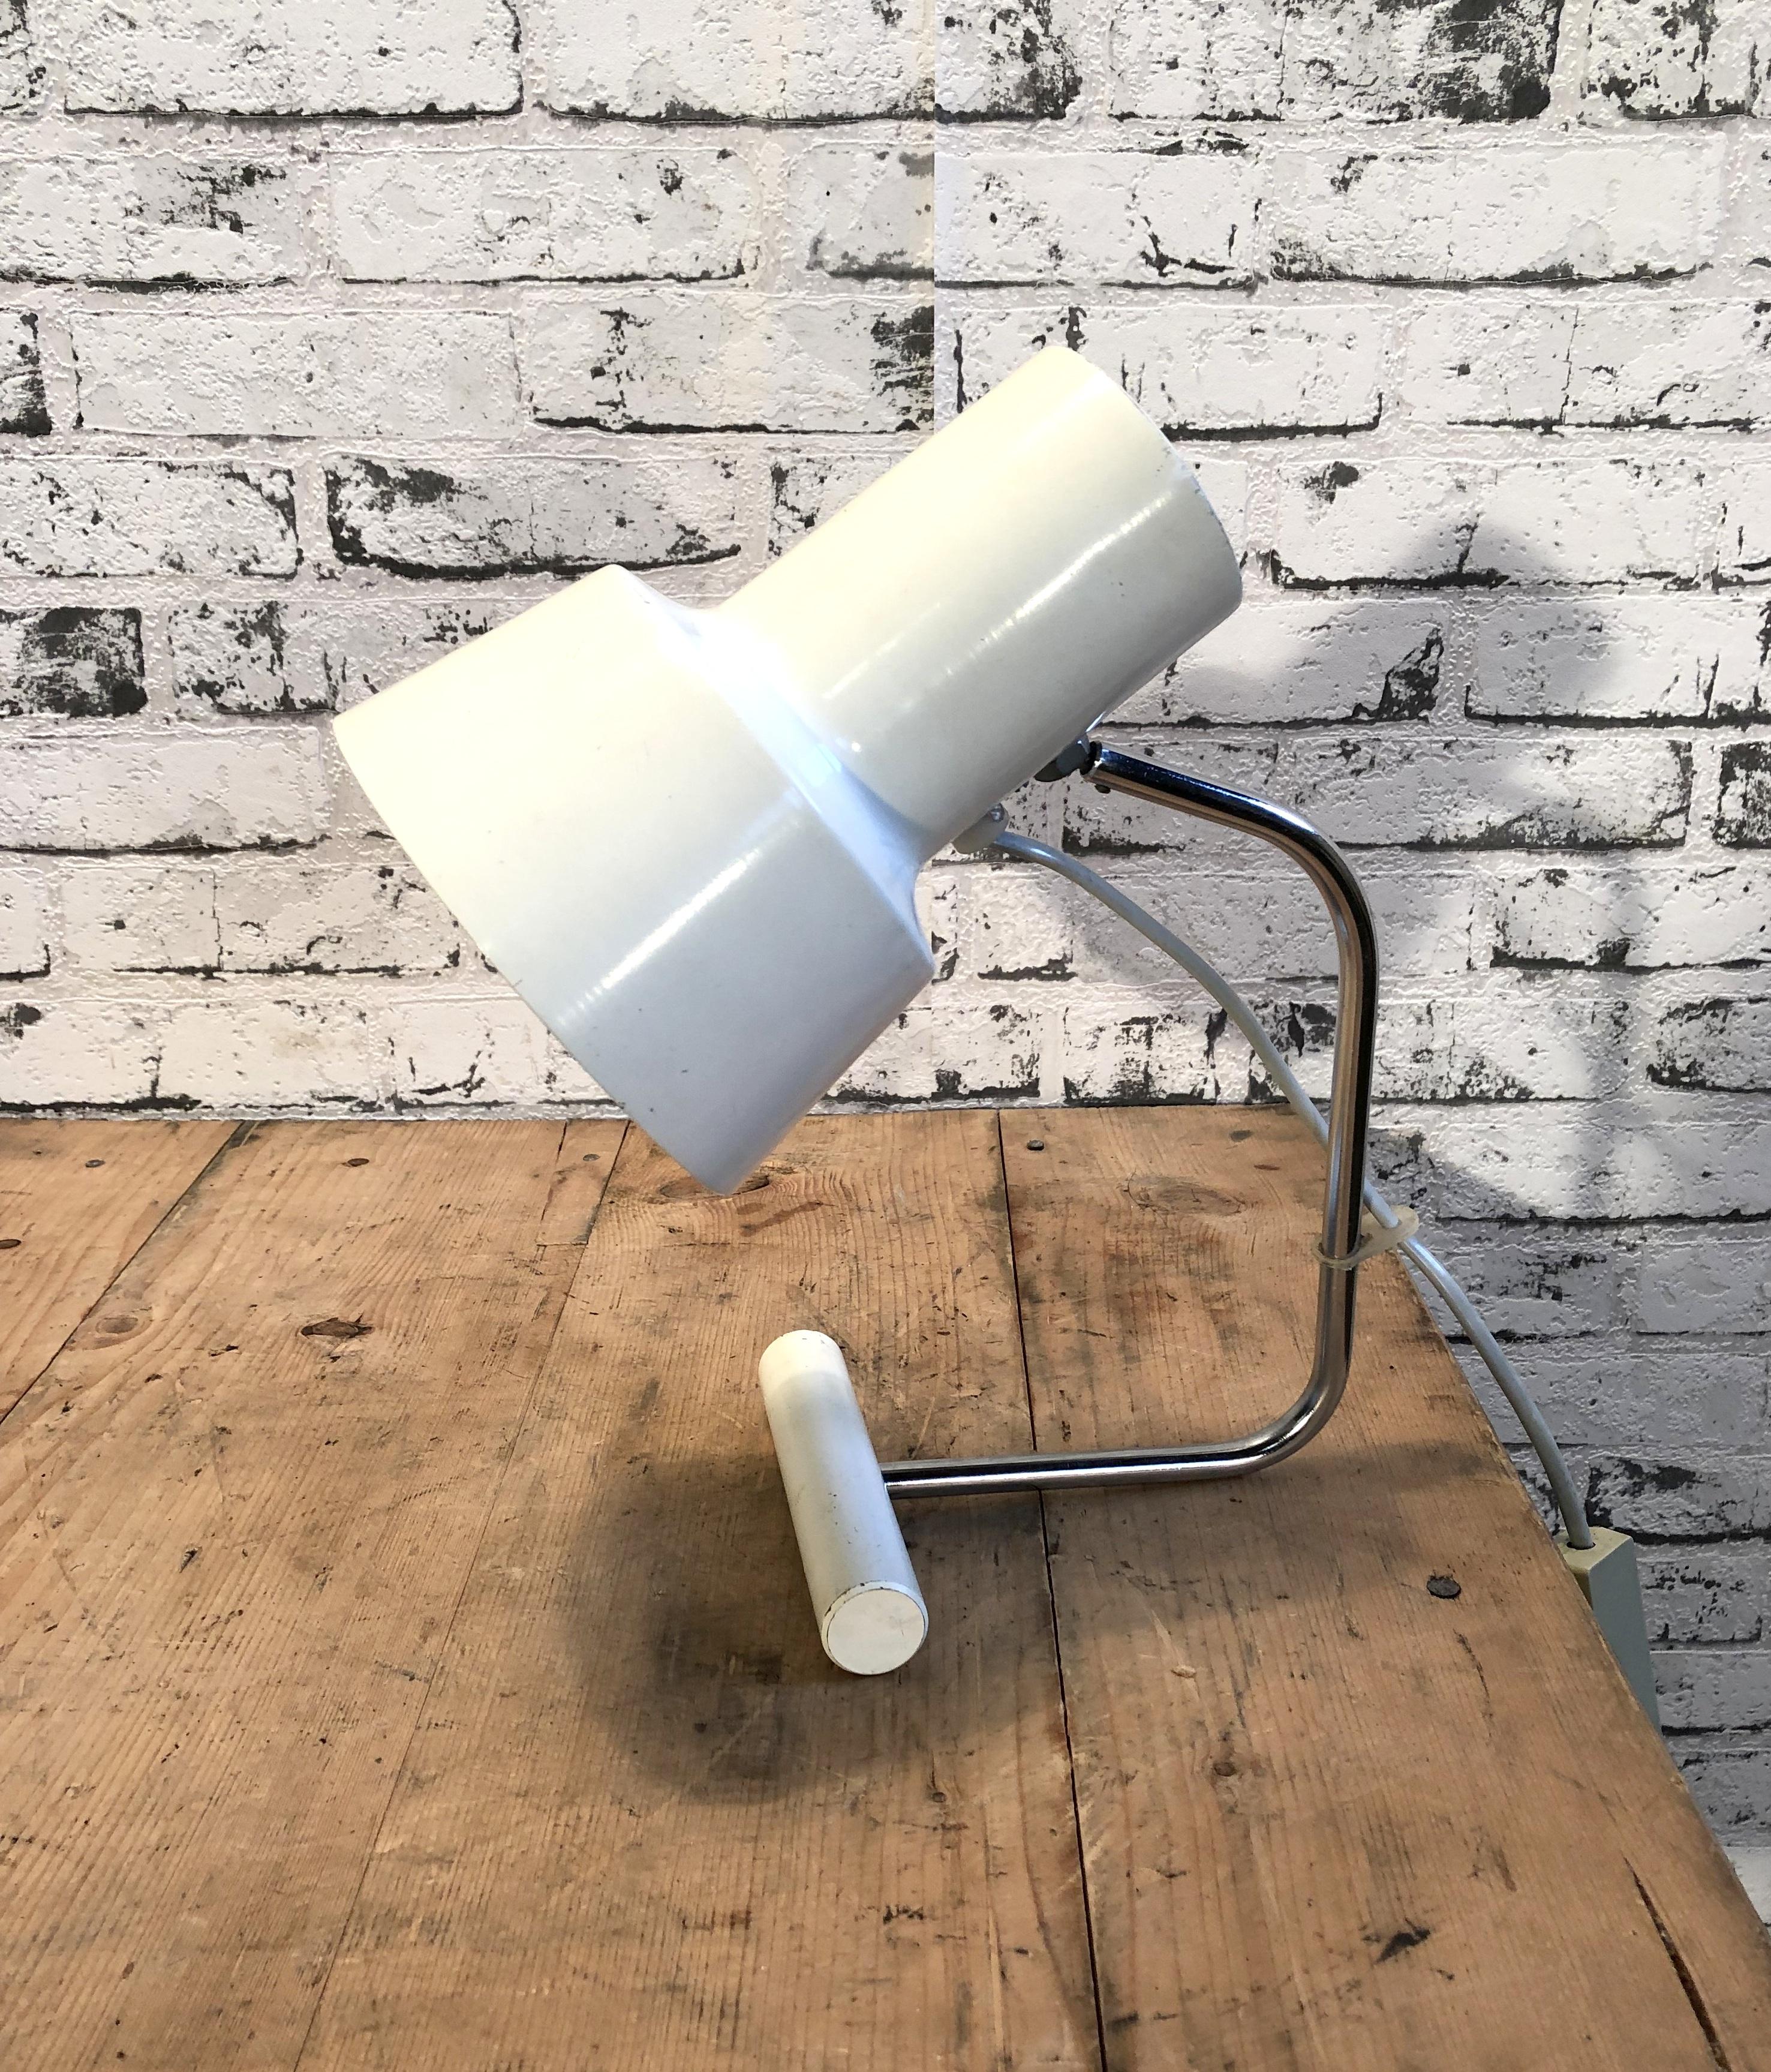 This table lamp, Napako model 85132, was designed by Josef Hurka and produced in former Czecholovakia by Napako during the 1960s. Lamp has steel body and aluminium lampshade. In a good vintage condition. Small signs of use.
 